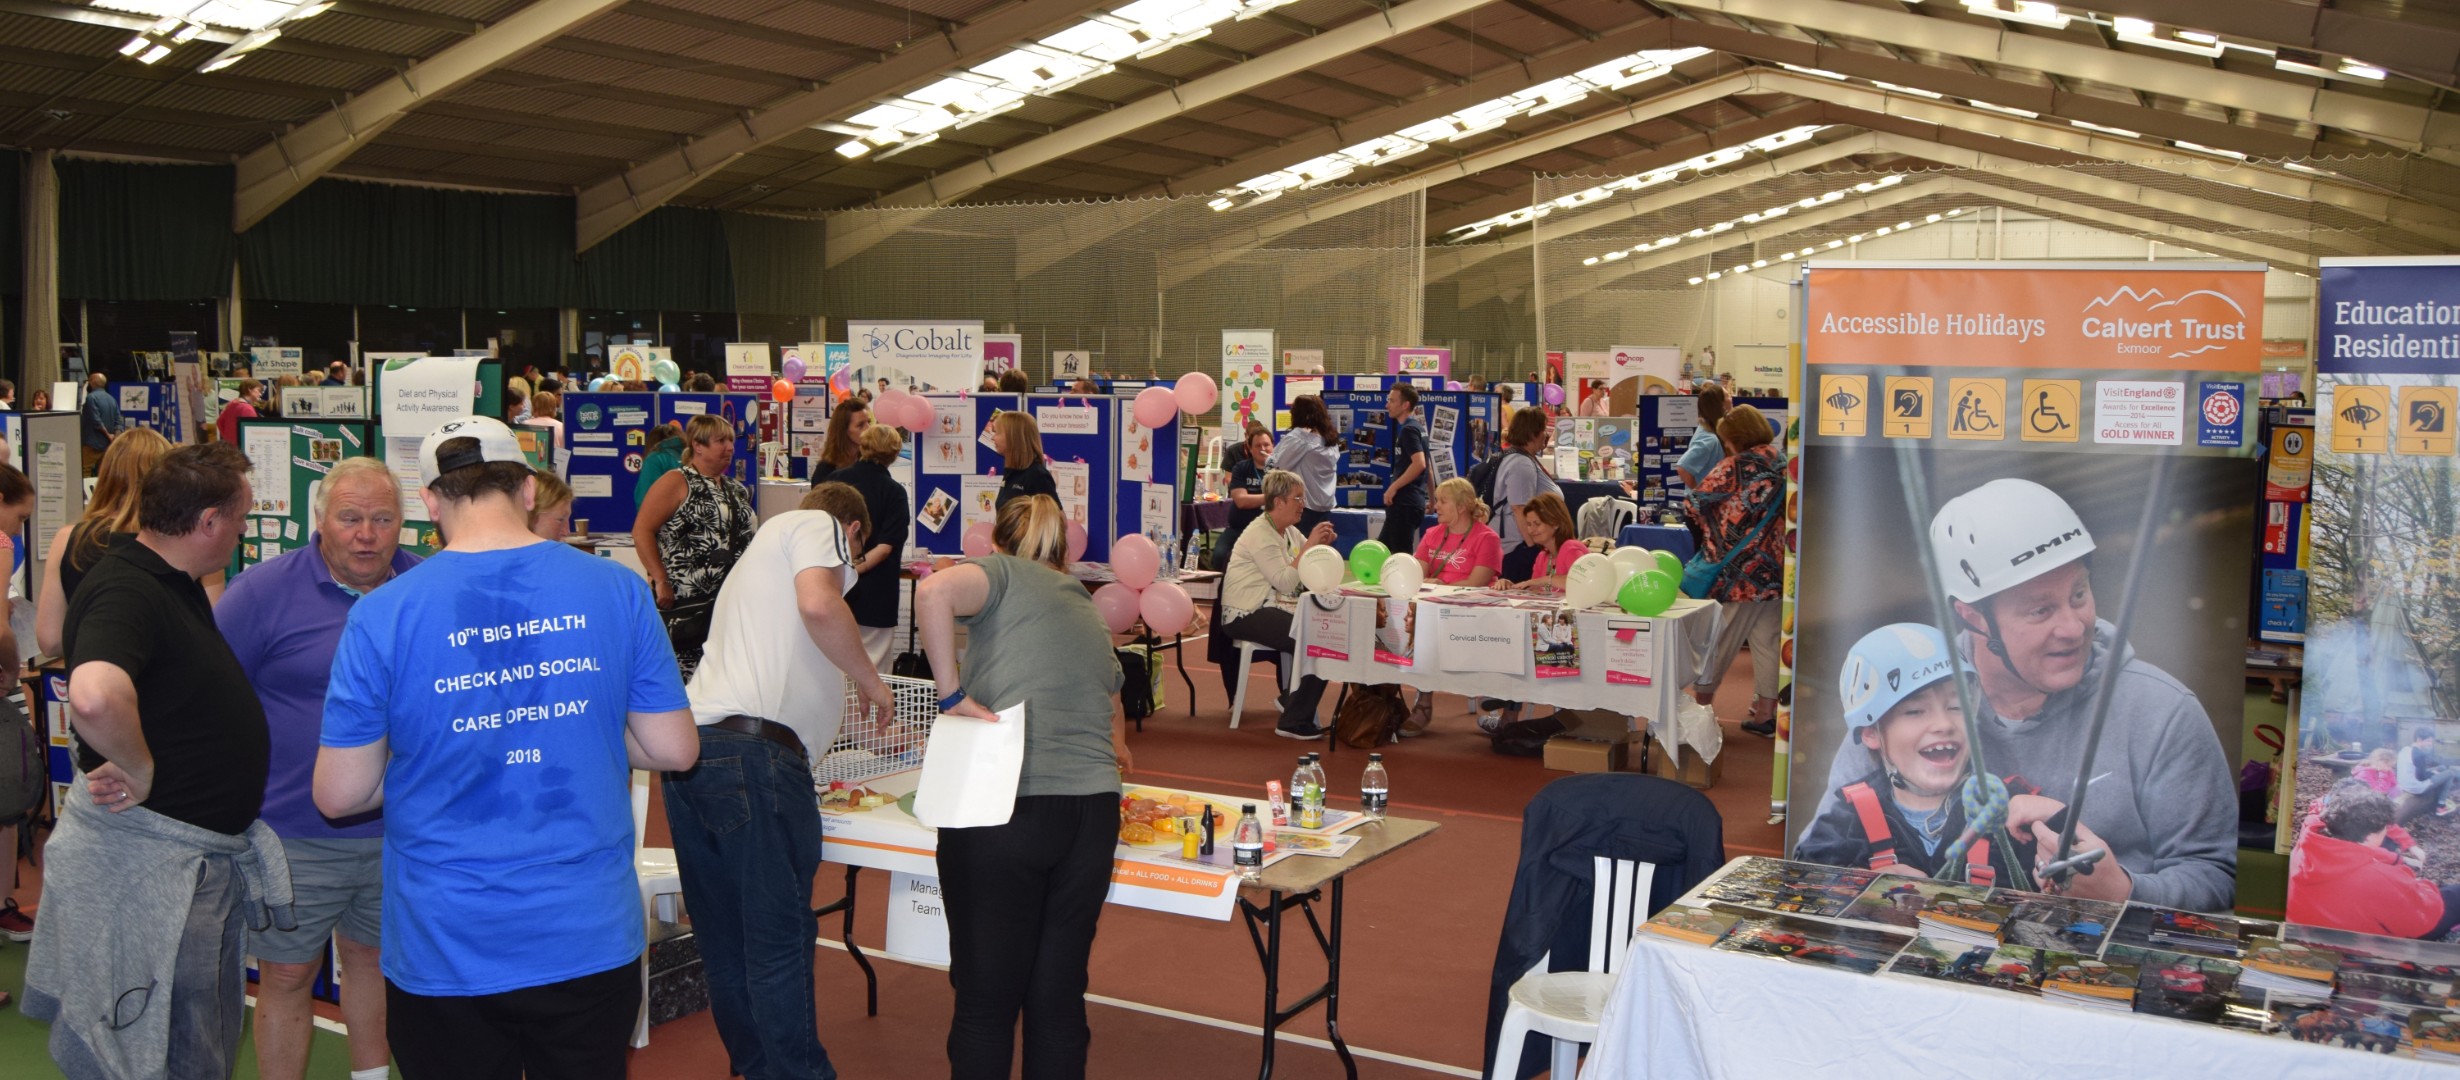 Indoor Health and Social Care Stands